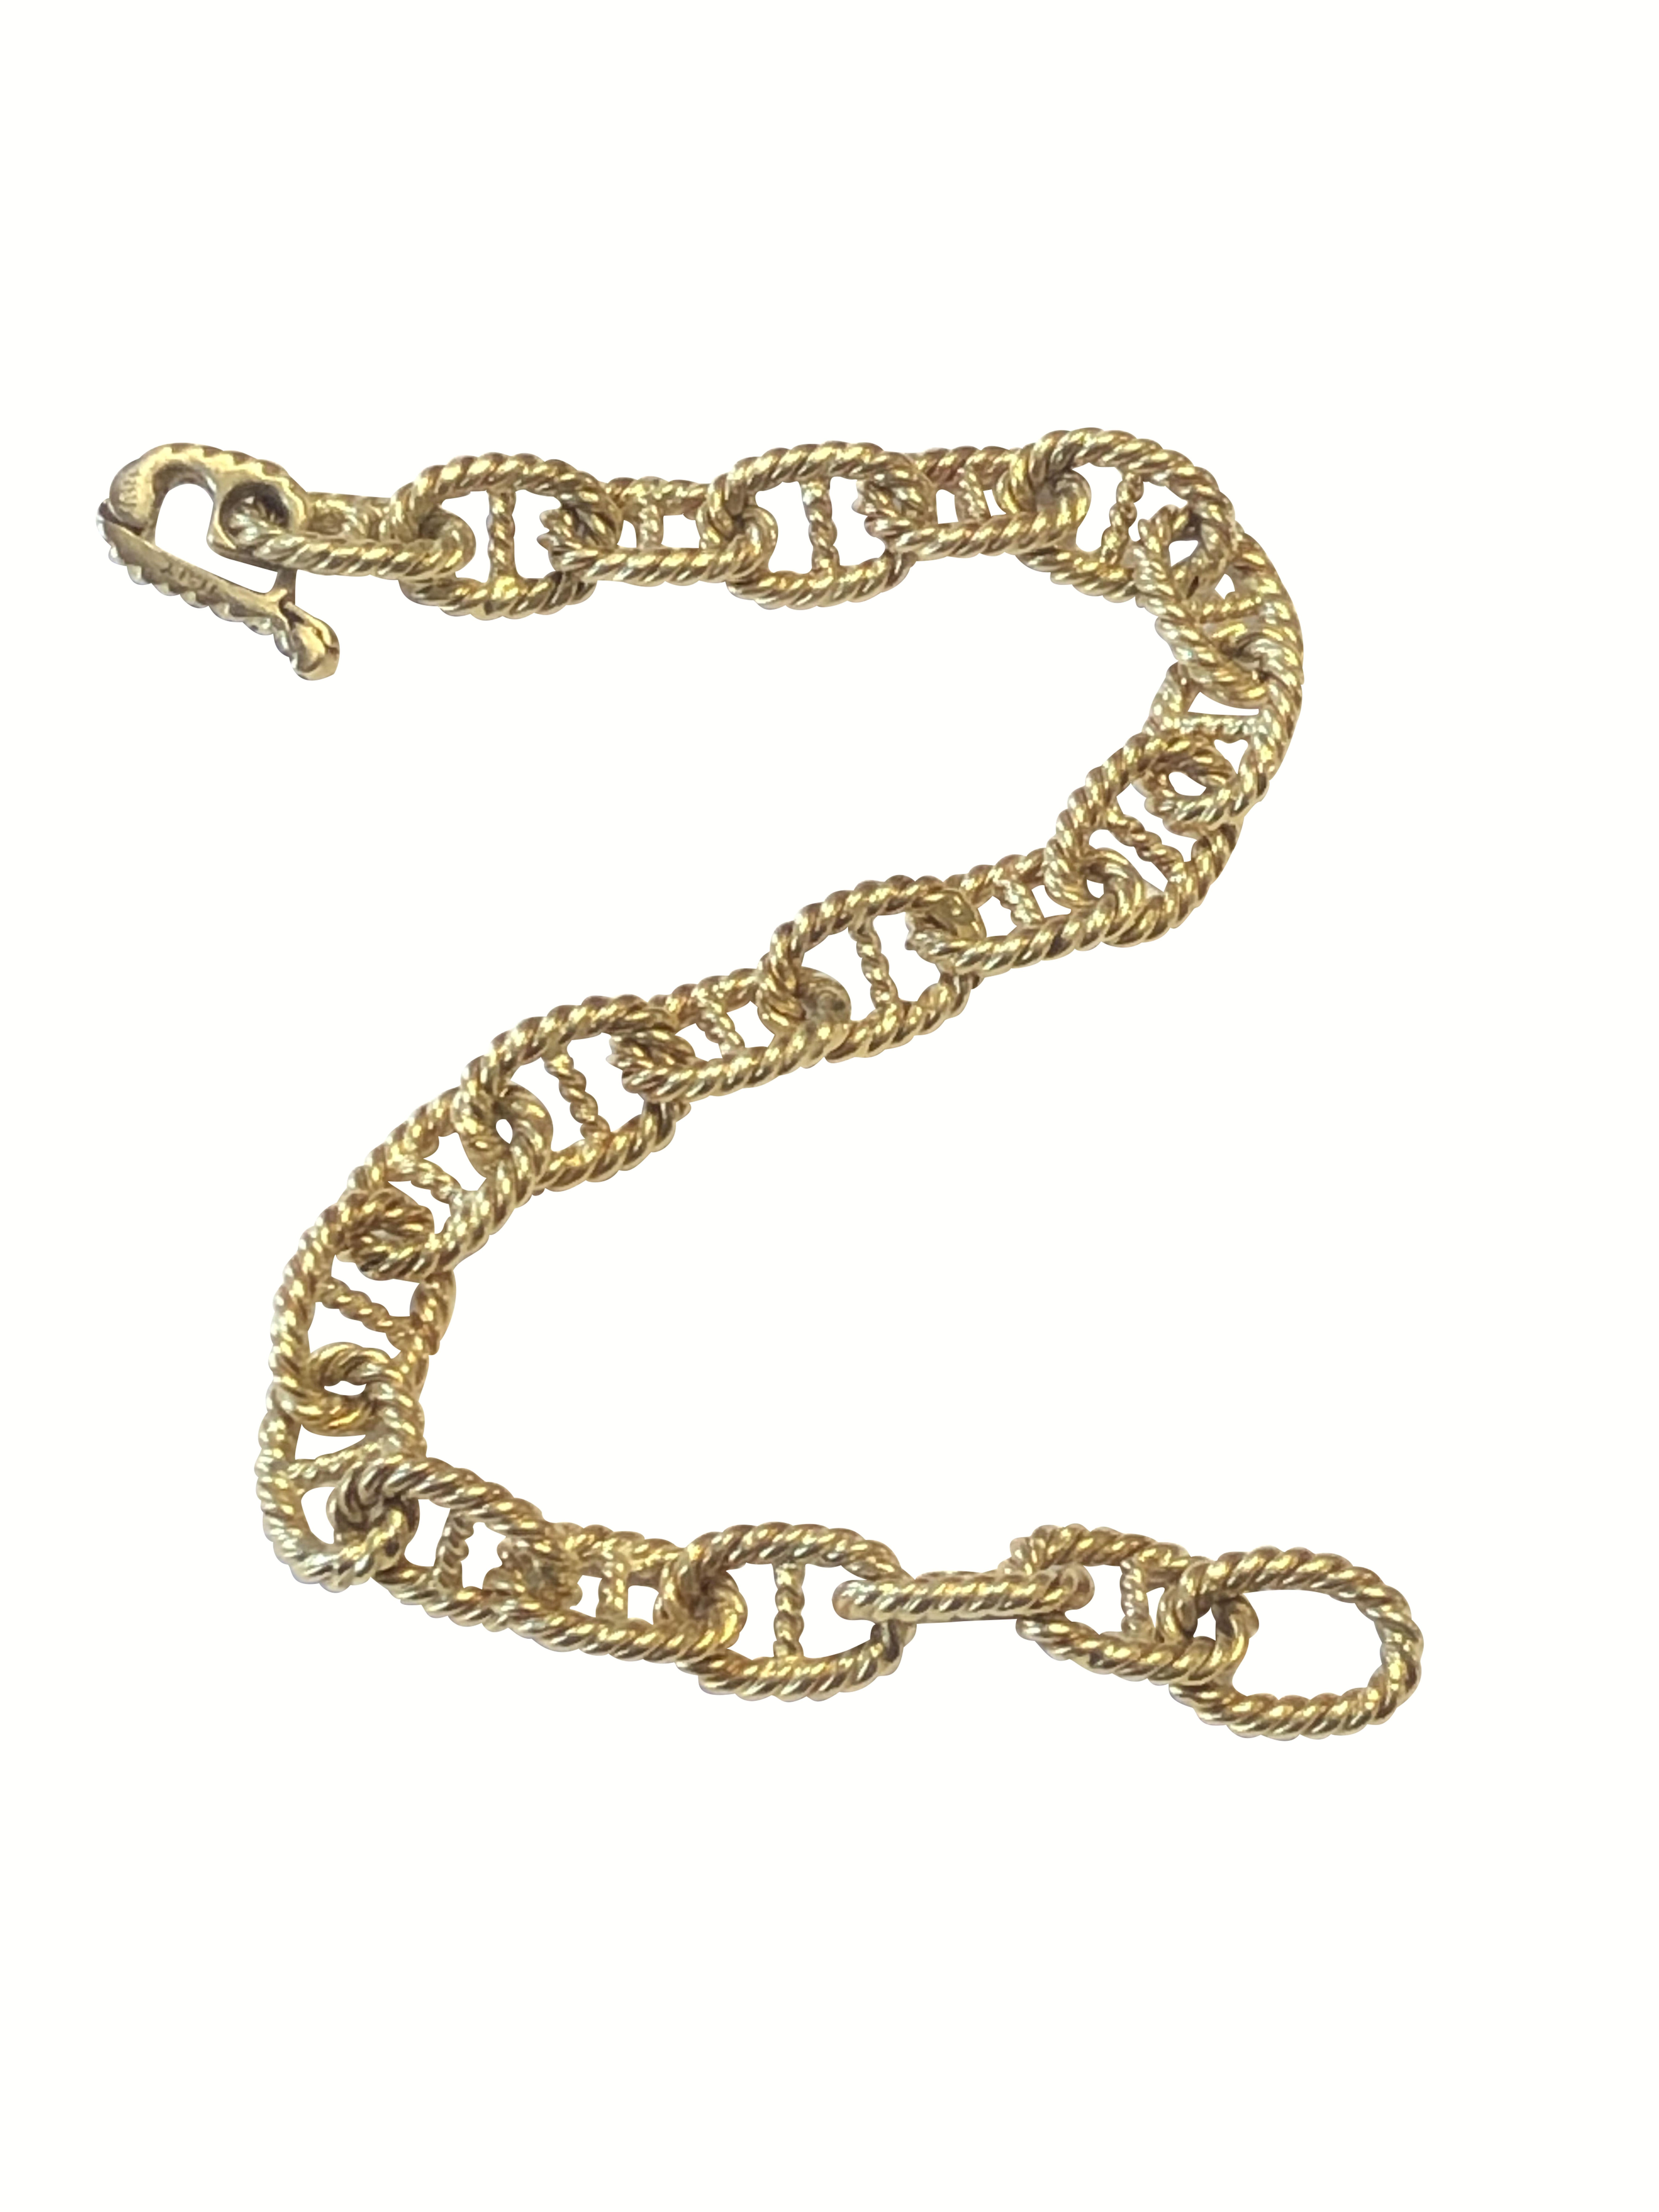 Circa 1970s Gucci 18K yellow Gold Nautical Link Bracelet, measuring 7 1/4 inches in length, 5/16 inch wide and weighing 12.5 Grams. Twisted Rope design, Excellent condition. 